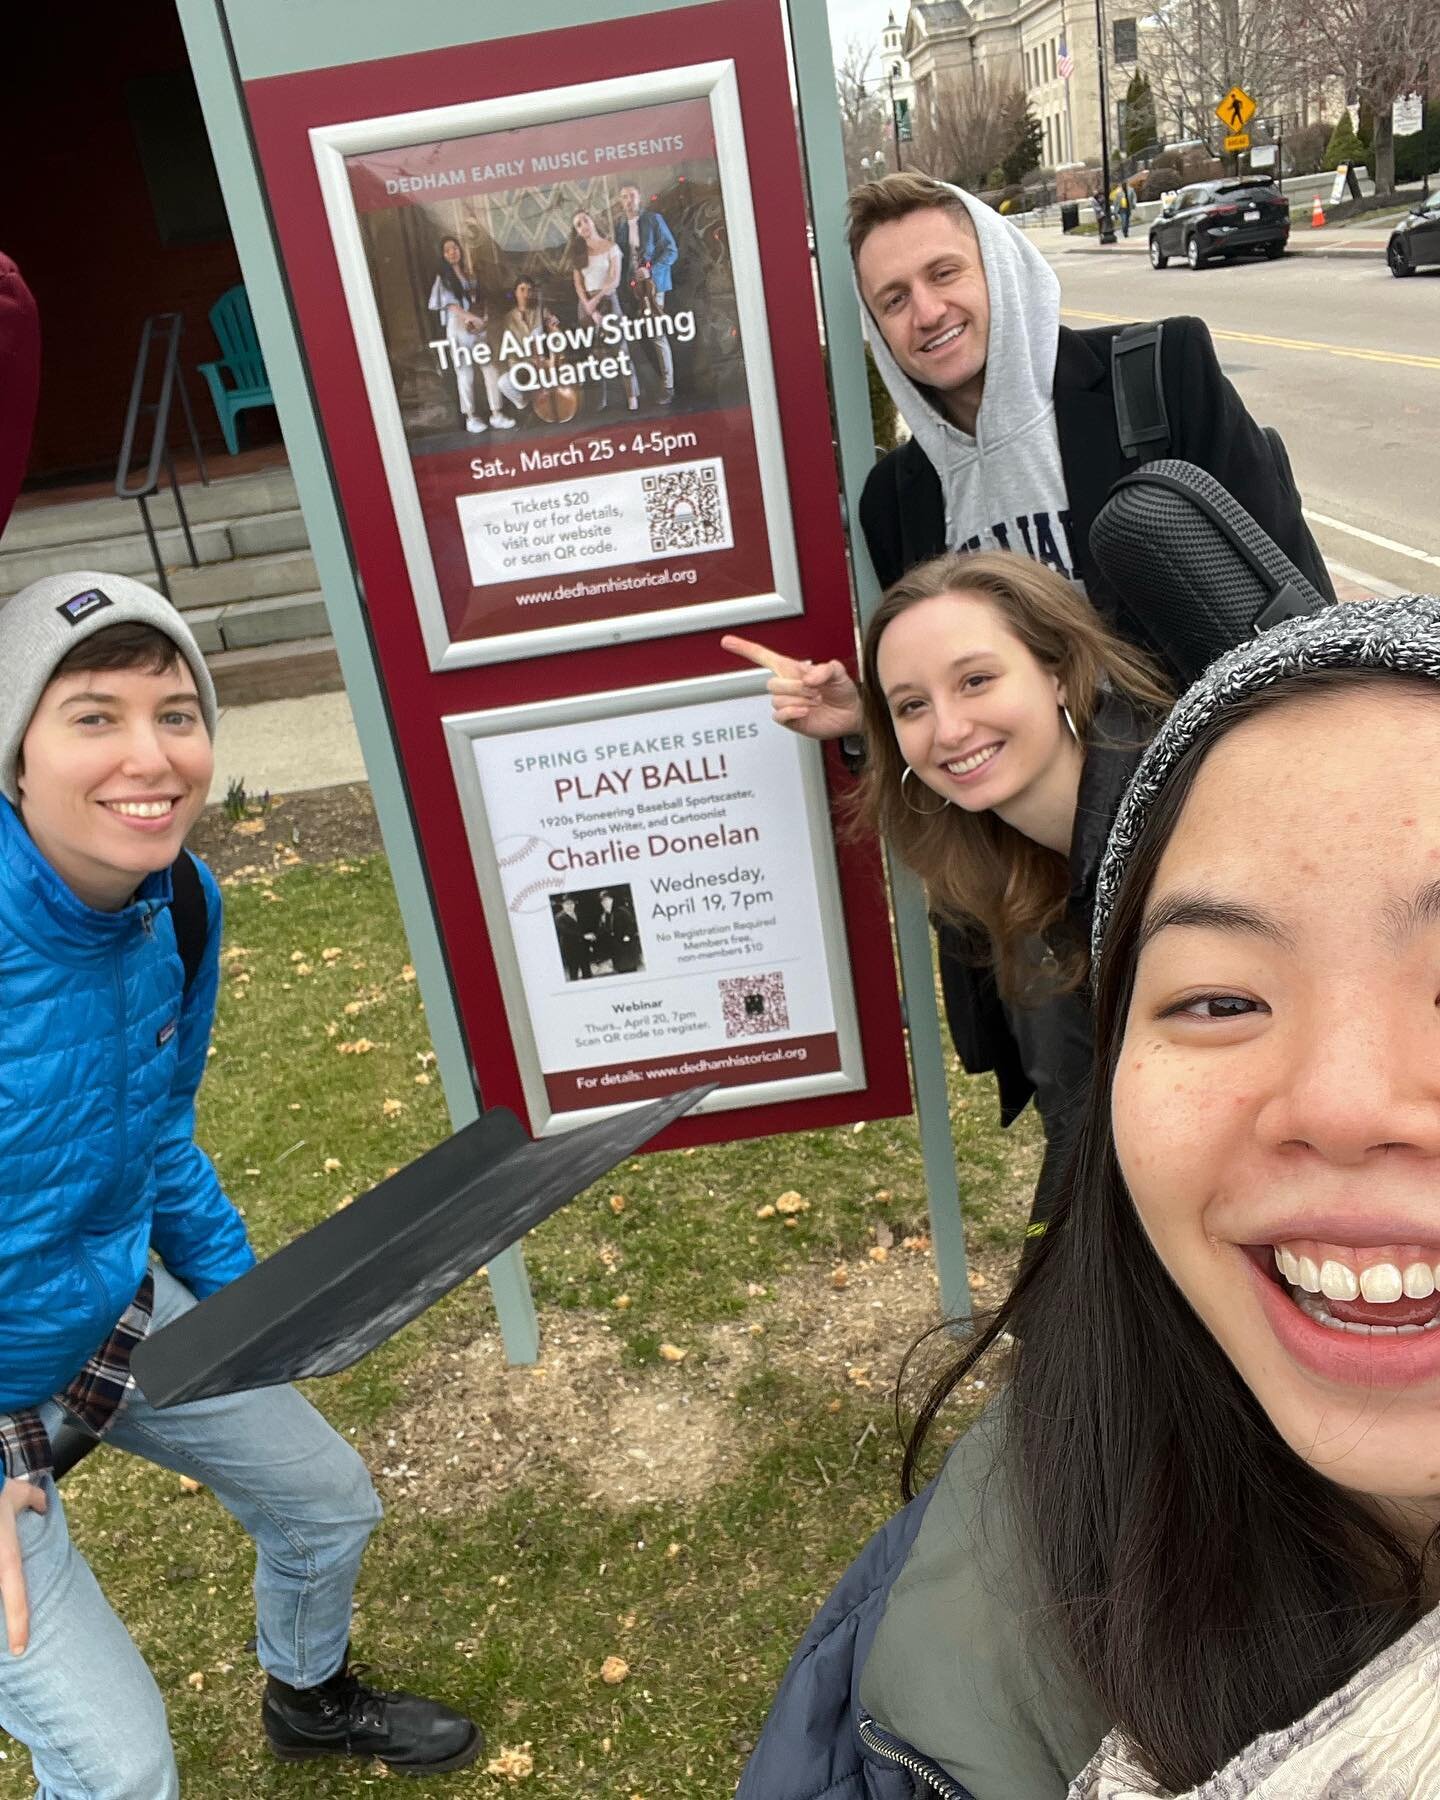 Such a fun weekend with @arrowquartet playing at @dedhamhistorical and @myrwu! Performing with these friends is such a gift and they never cease to inspire me (especially @viviankmayers' knife and poetry skills).
.
.
.
#violin #baroque #classical #mu